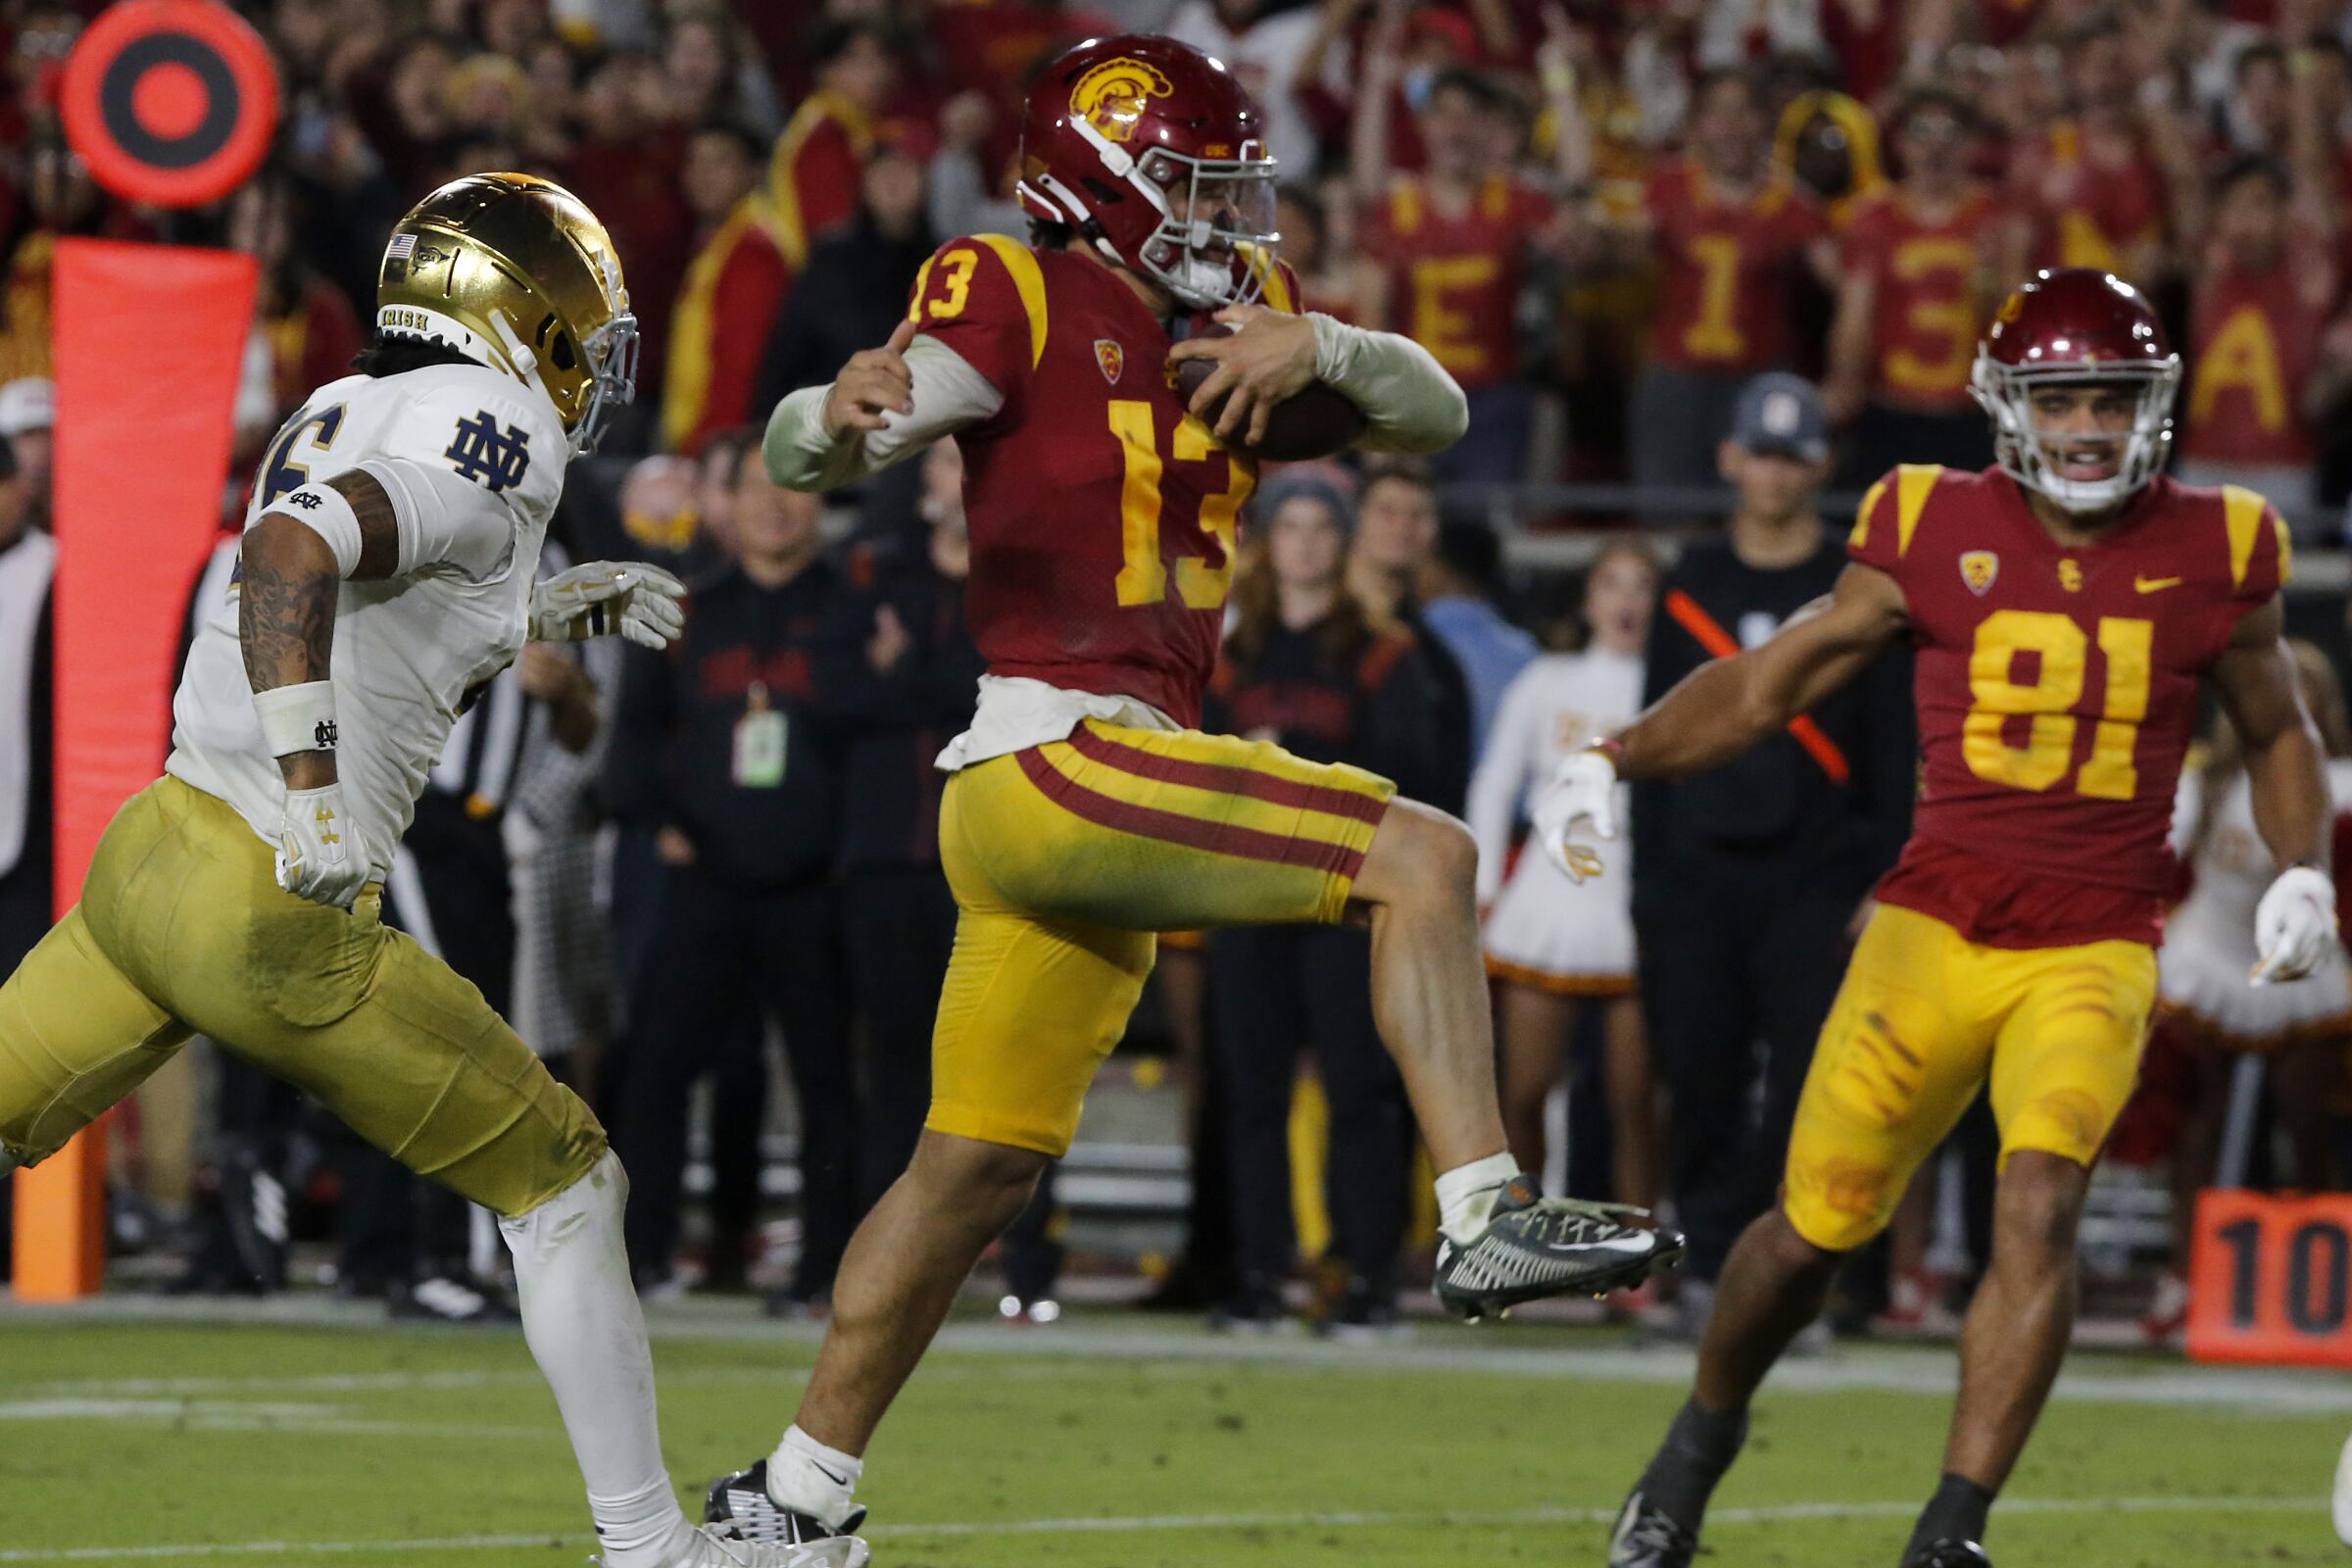 USC quarterback Caleb Williams leaps into the end zone for a touchdown against Notre Dame.